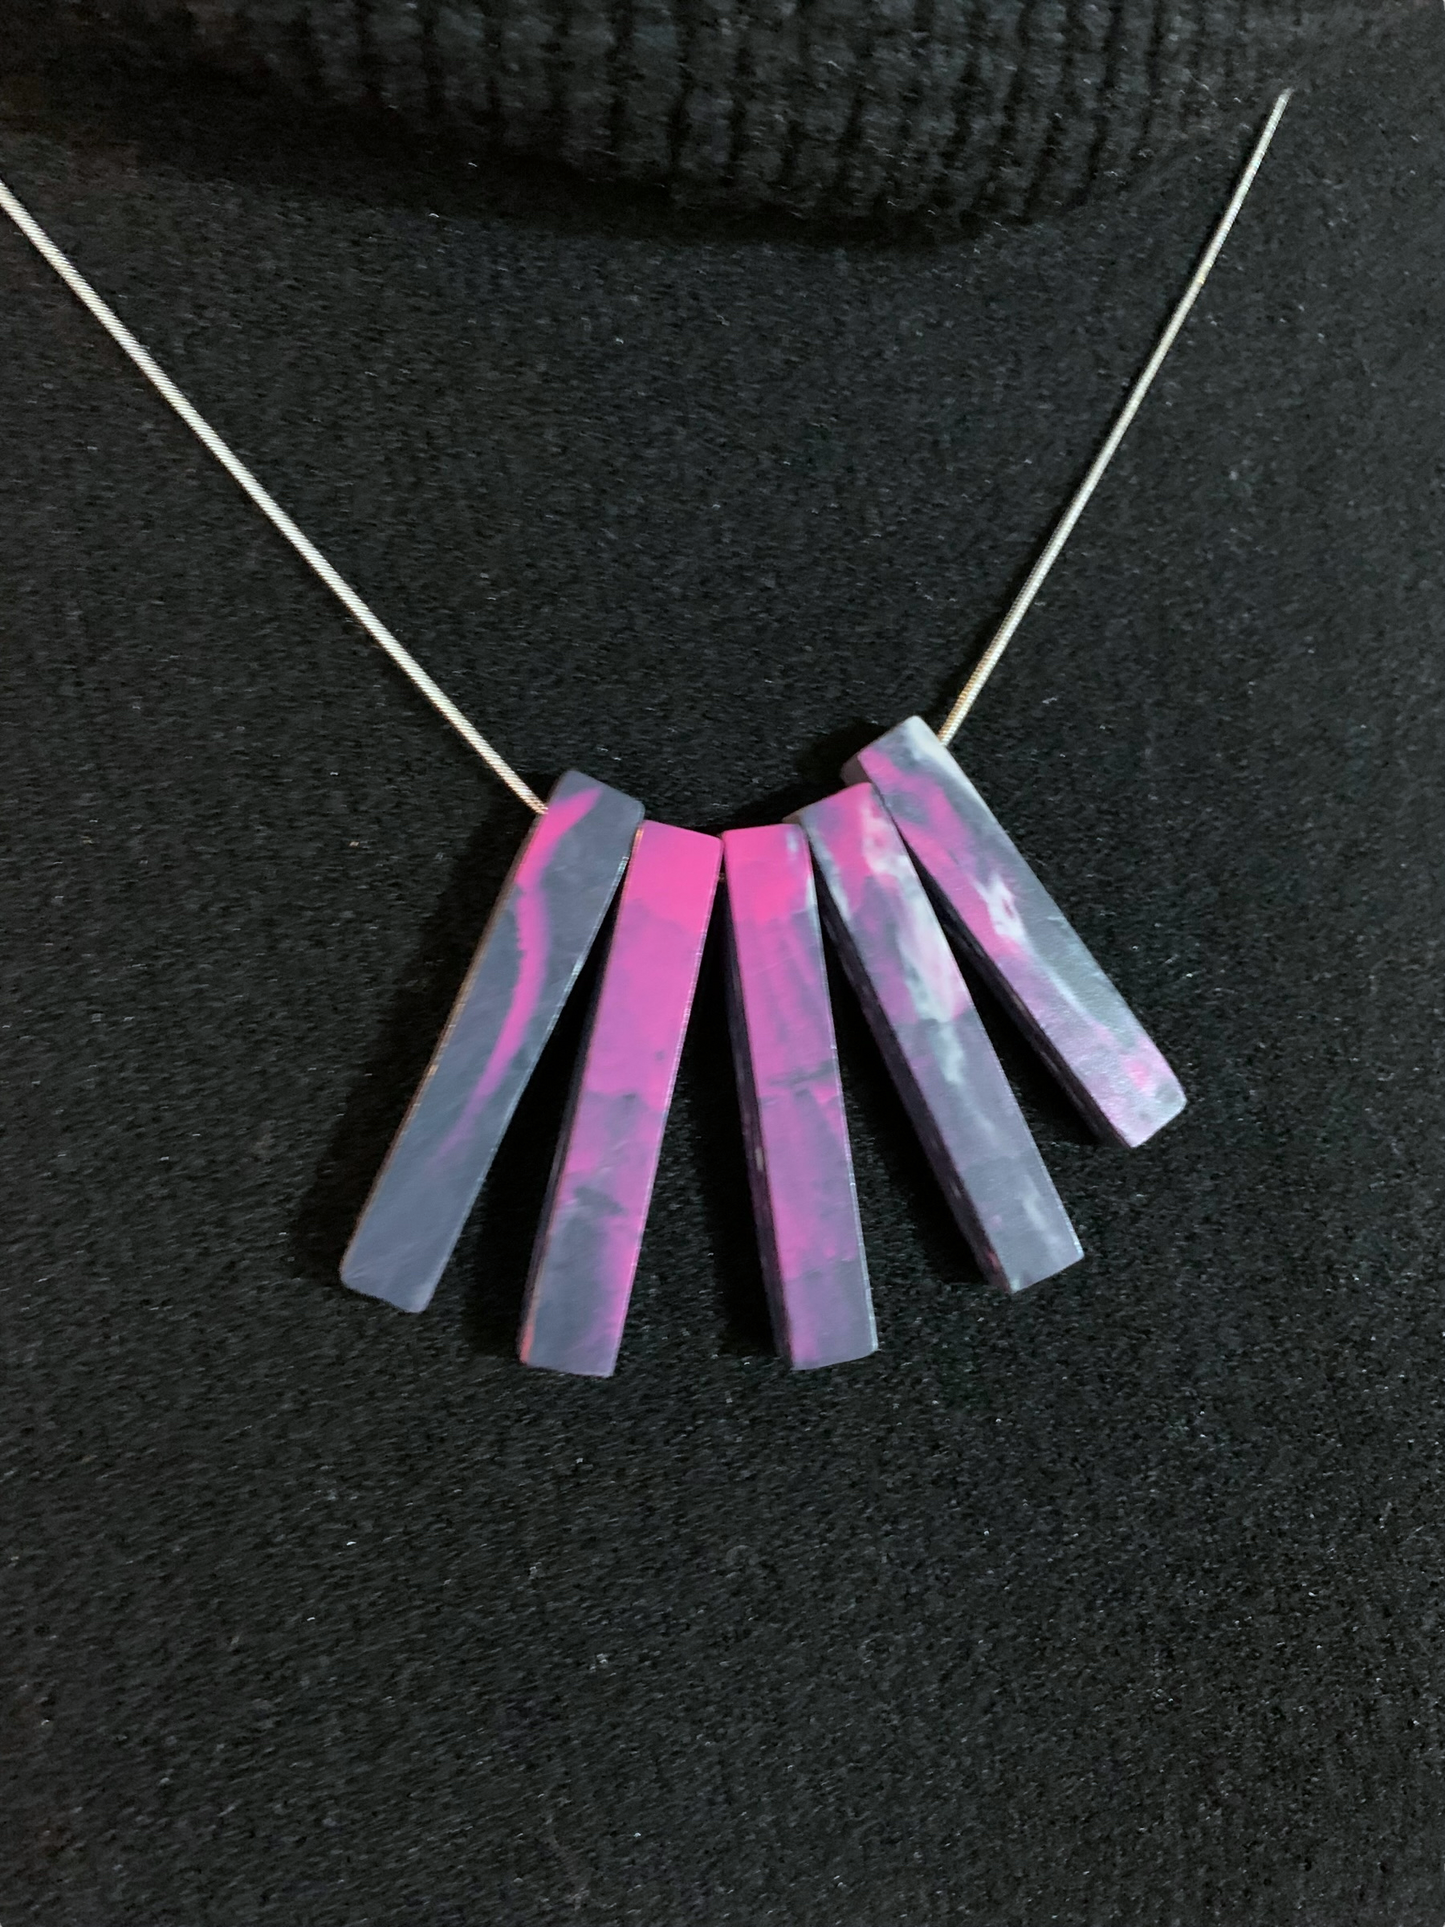 Bib Necklace with 925 Sterling Silver Snake Chain Pink Twist grandmother gift Recycled plastic necklace jewellery earrings studs handmade in London by Jagoda Jay Sudak Keshani eco gift for her him